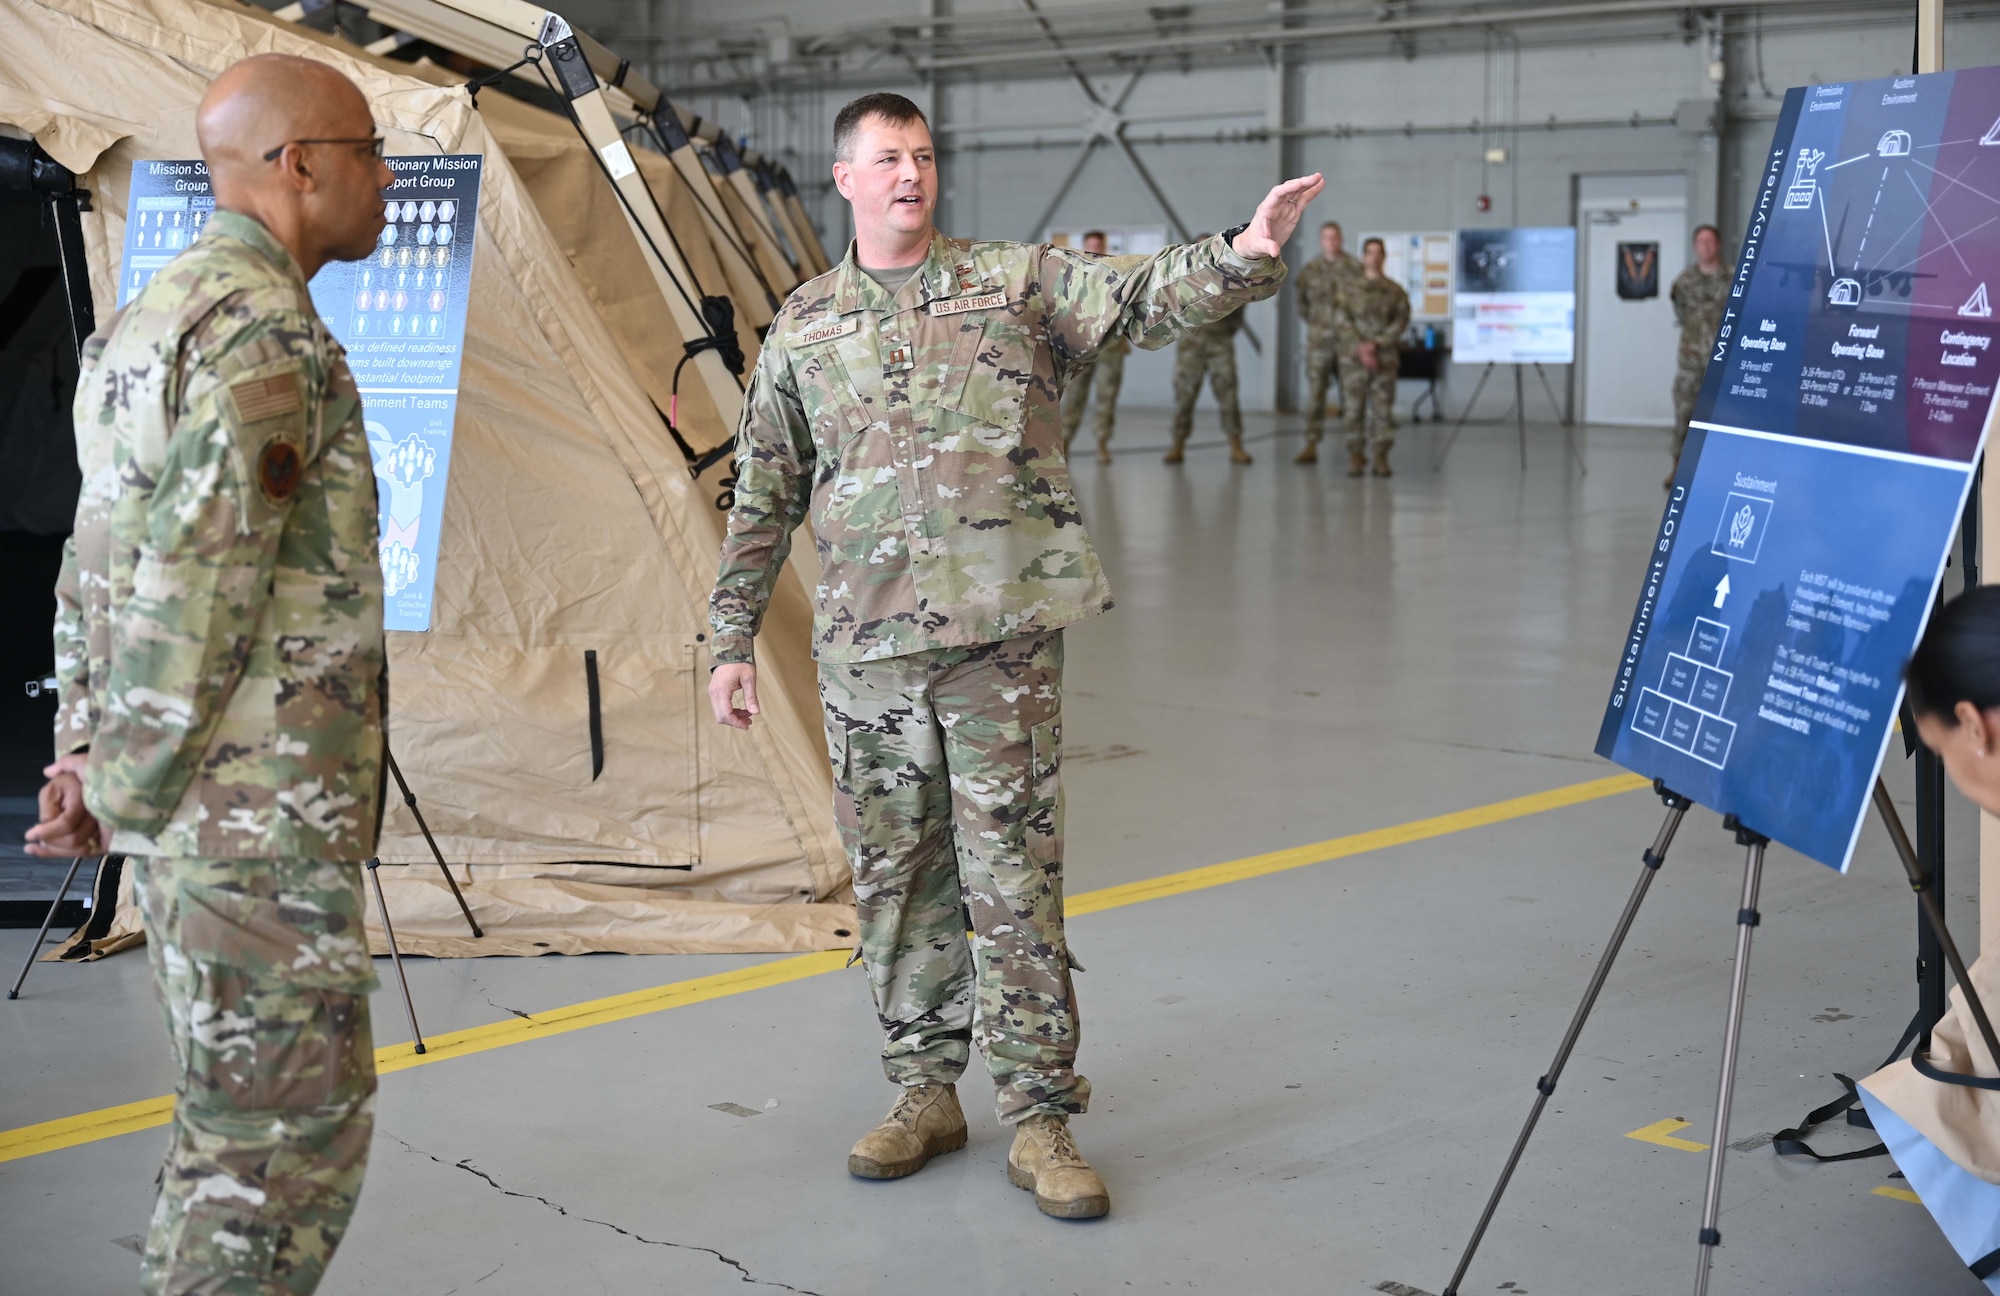 U.S. Air Force Capt. Joseph Thomas, director of operations for the 27th Mission Support Group, Detachment 1, briefs Air Force Chief of Staff Gen. CQ Brown, Jr., on Mission Sustainment Teams during Brown’s visit to Hurlburt Field, Florida, April 4, 2022. During his visit, Brown also met with junior enlisted Airmen and received command updates from Headquarters AFSOC staff, and briefings on Aviation Special Operations Task Units and Special Operations Task Groups. (U.S. Air Force photo by Staff Sgt. Brandon Esau)